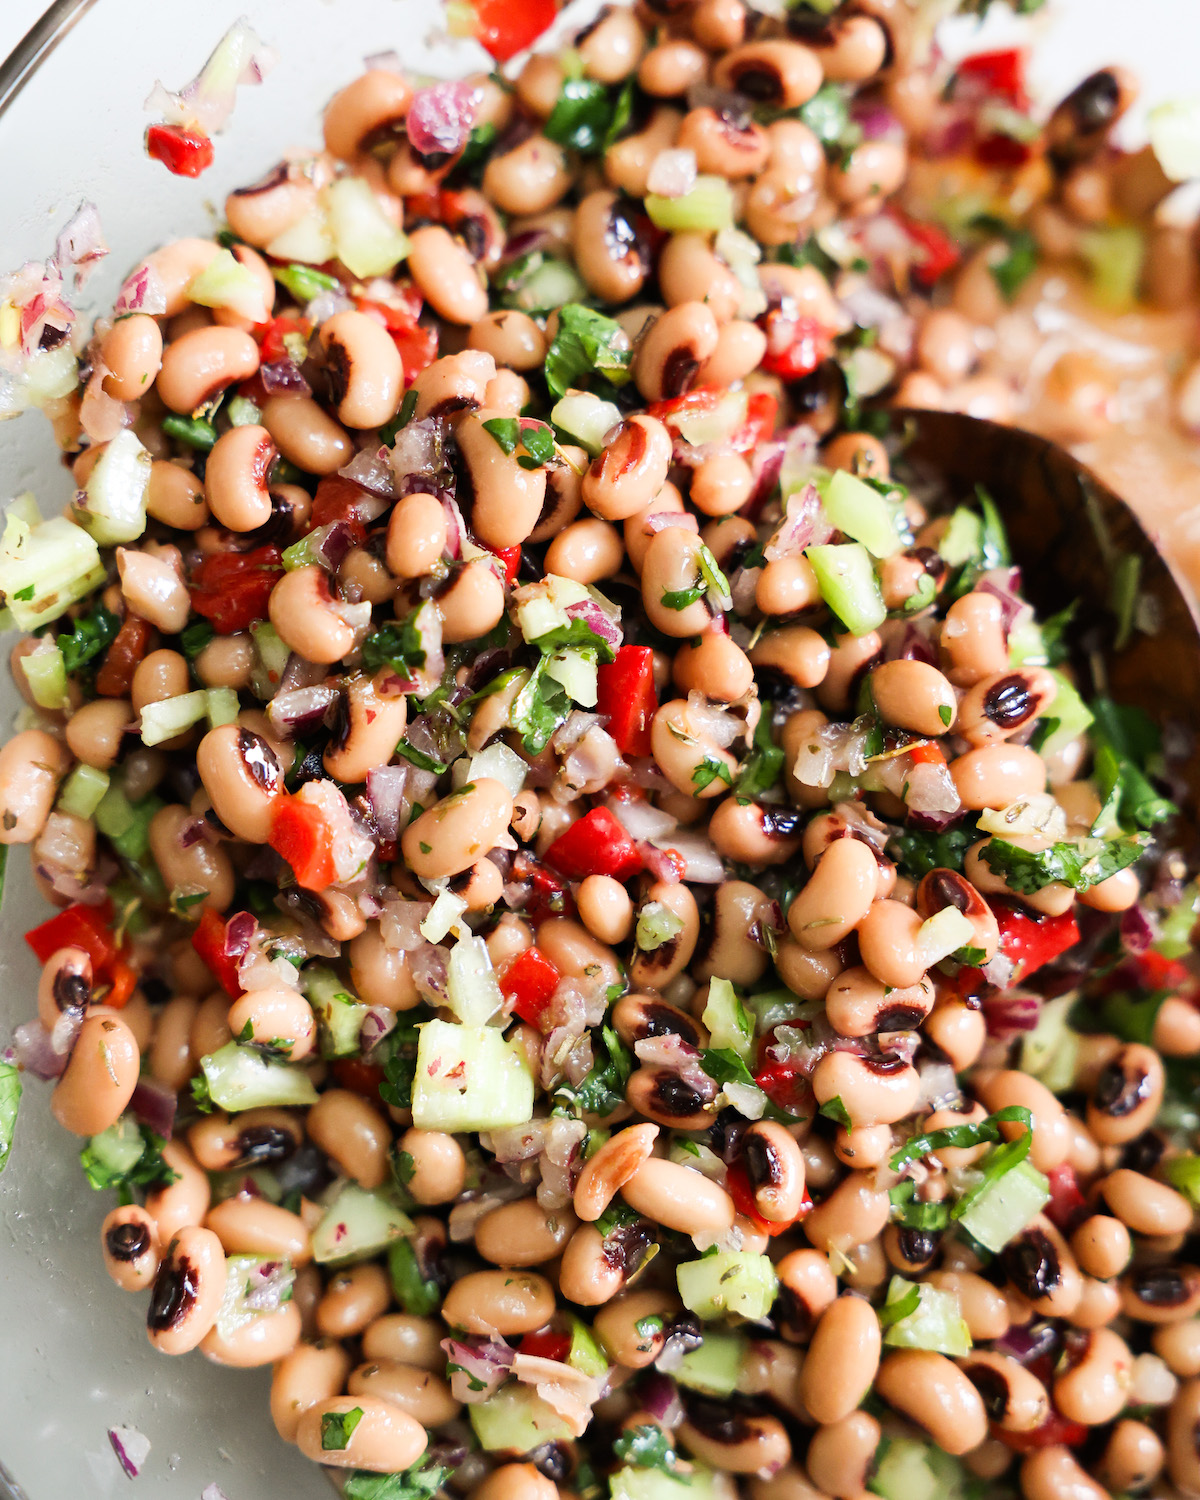 Black eyed pea salad in a glass bowl with wooden spoon